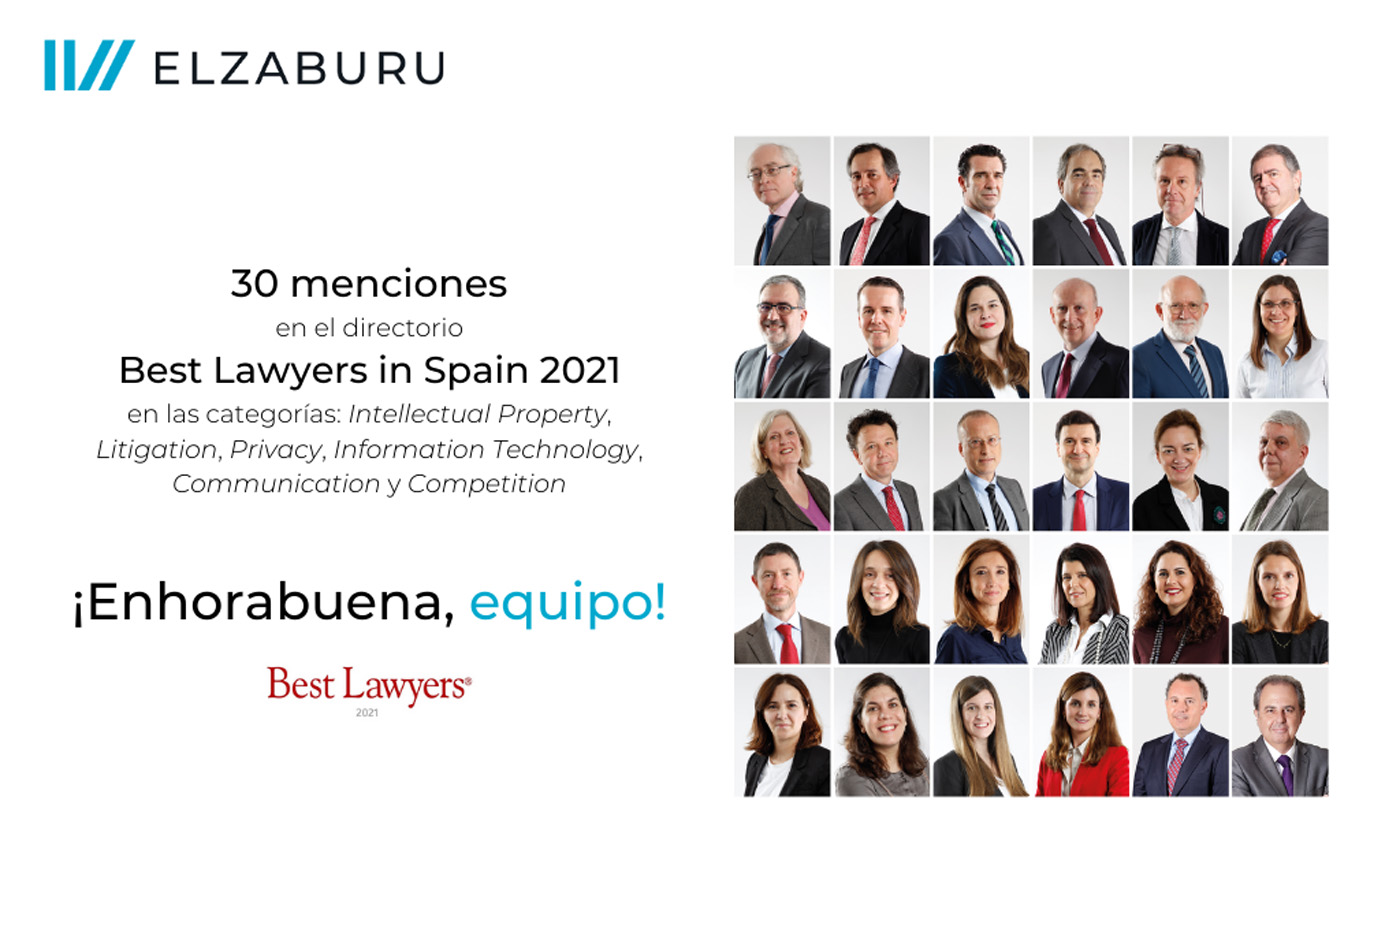 elzaburu achieves 30 mentions in the best lawyers in spain 2021 directory in the categories of intellectual property, litigation, privacy, information technology, communication and competition